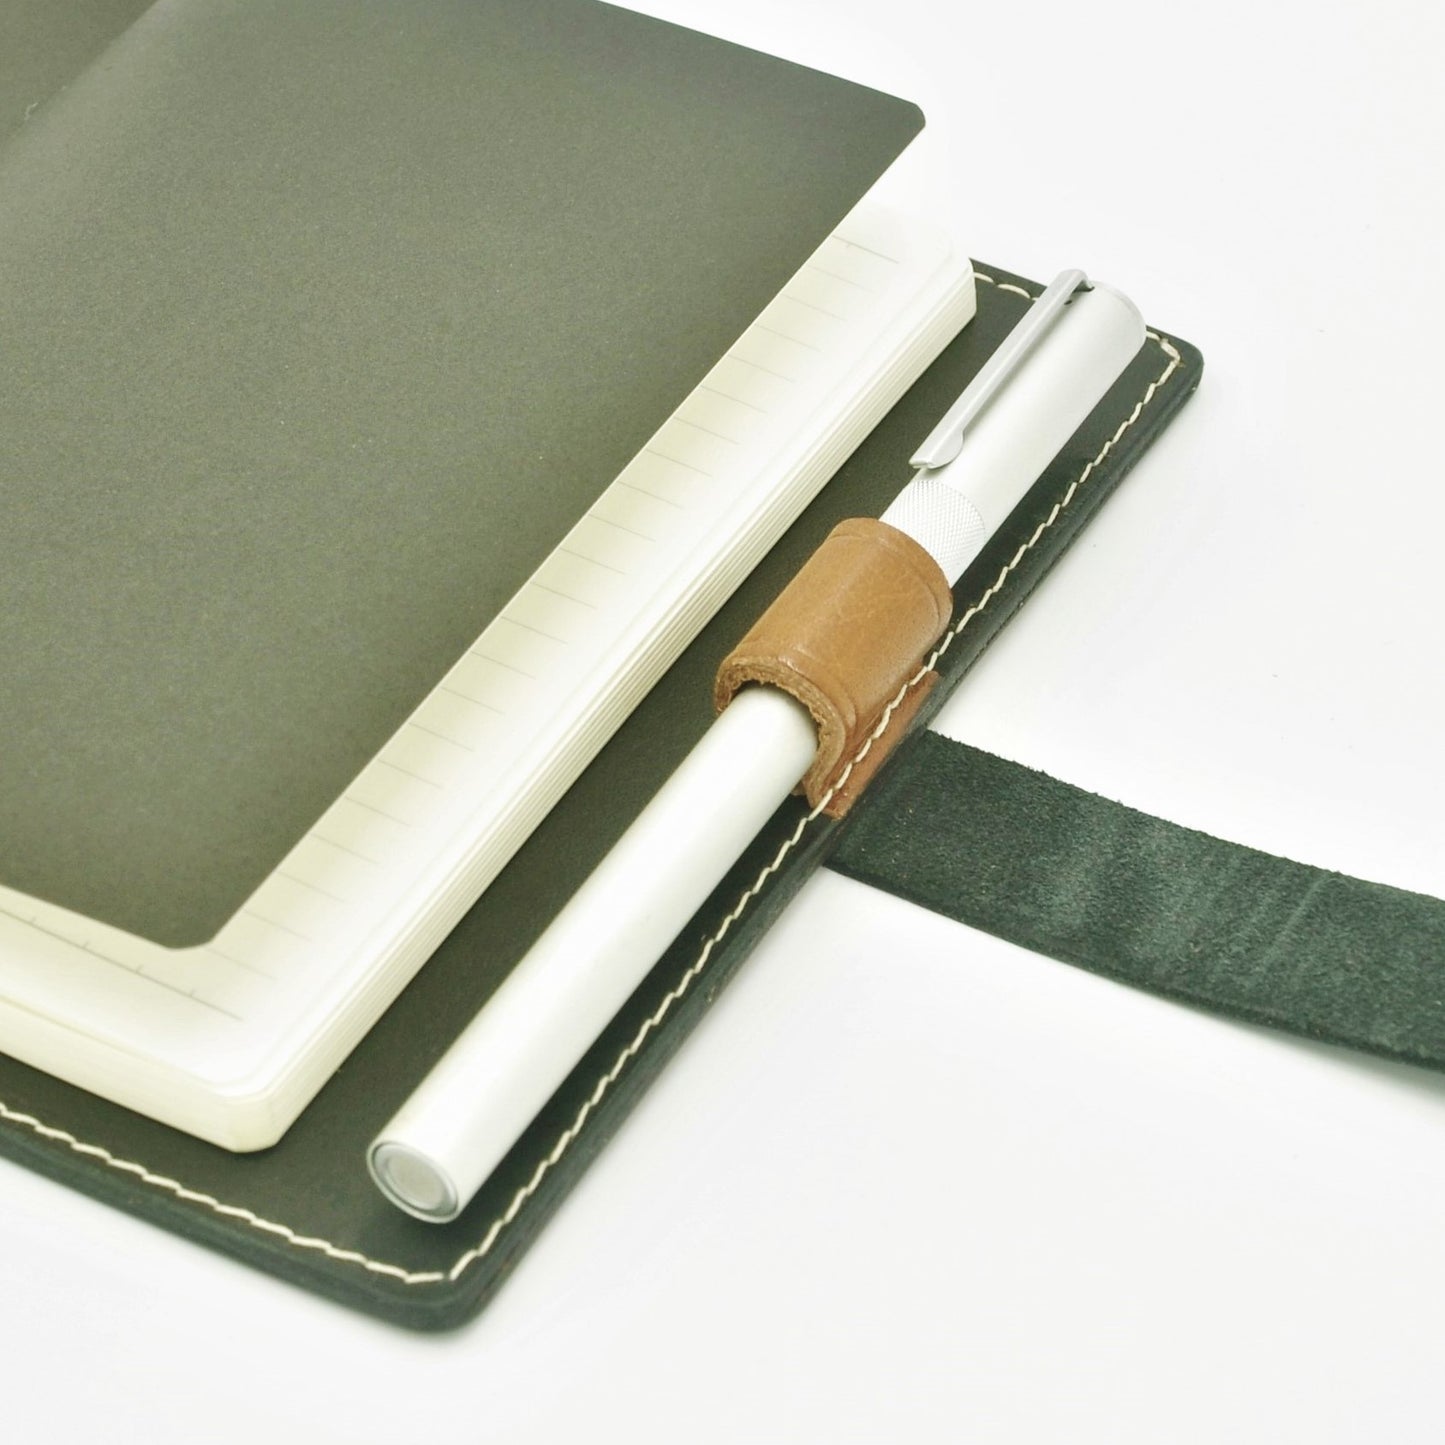 HERITAGE A6-P Leather Notebook Cover Duo-Tone